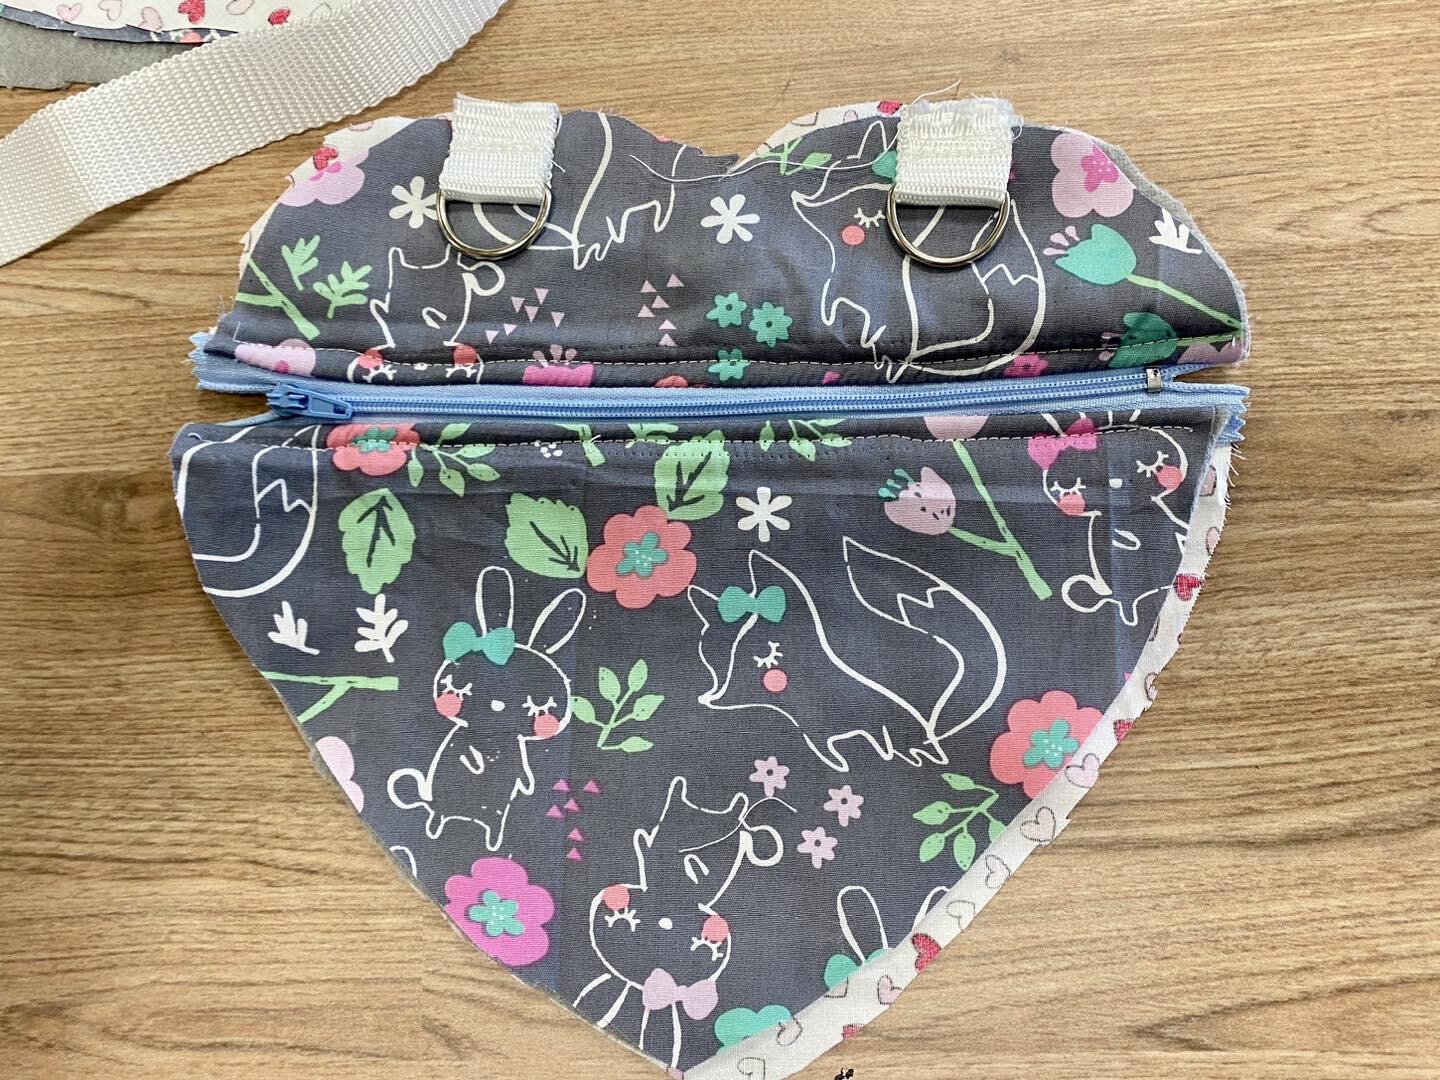 💚The Children&rsquo;s zips are going into their heart bags, they&rsquo;ve sandwiched all the layers together and then topstitched the edges to keep the zip clear. Som every fiddly work, and some brilliant results! 💚

#sewingclass #sewyourown #sewyo